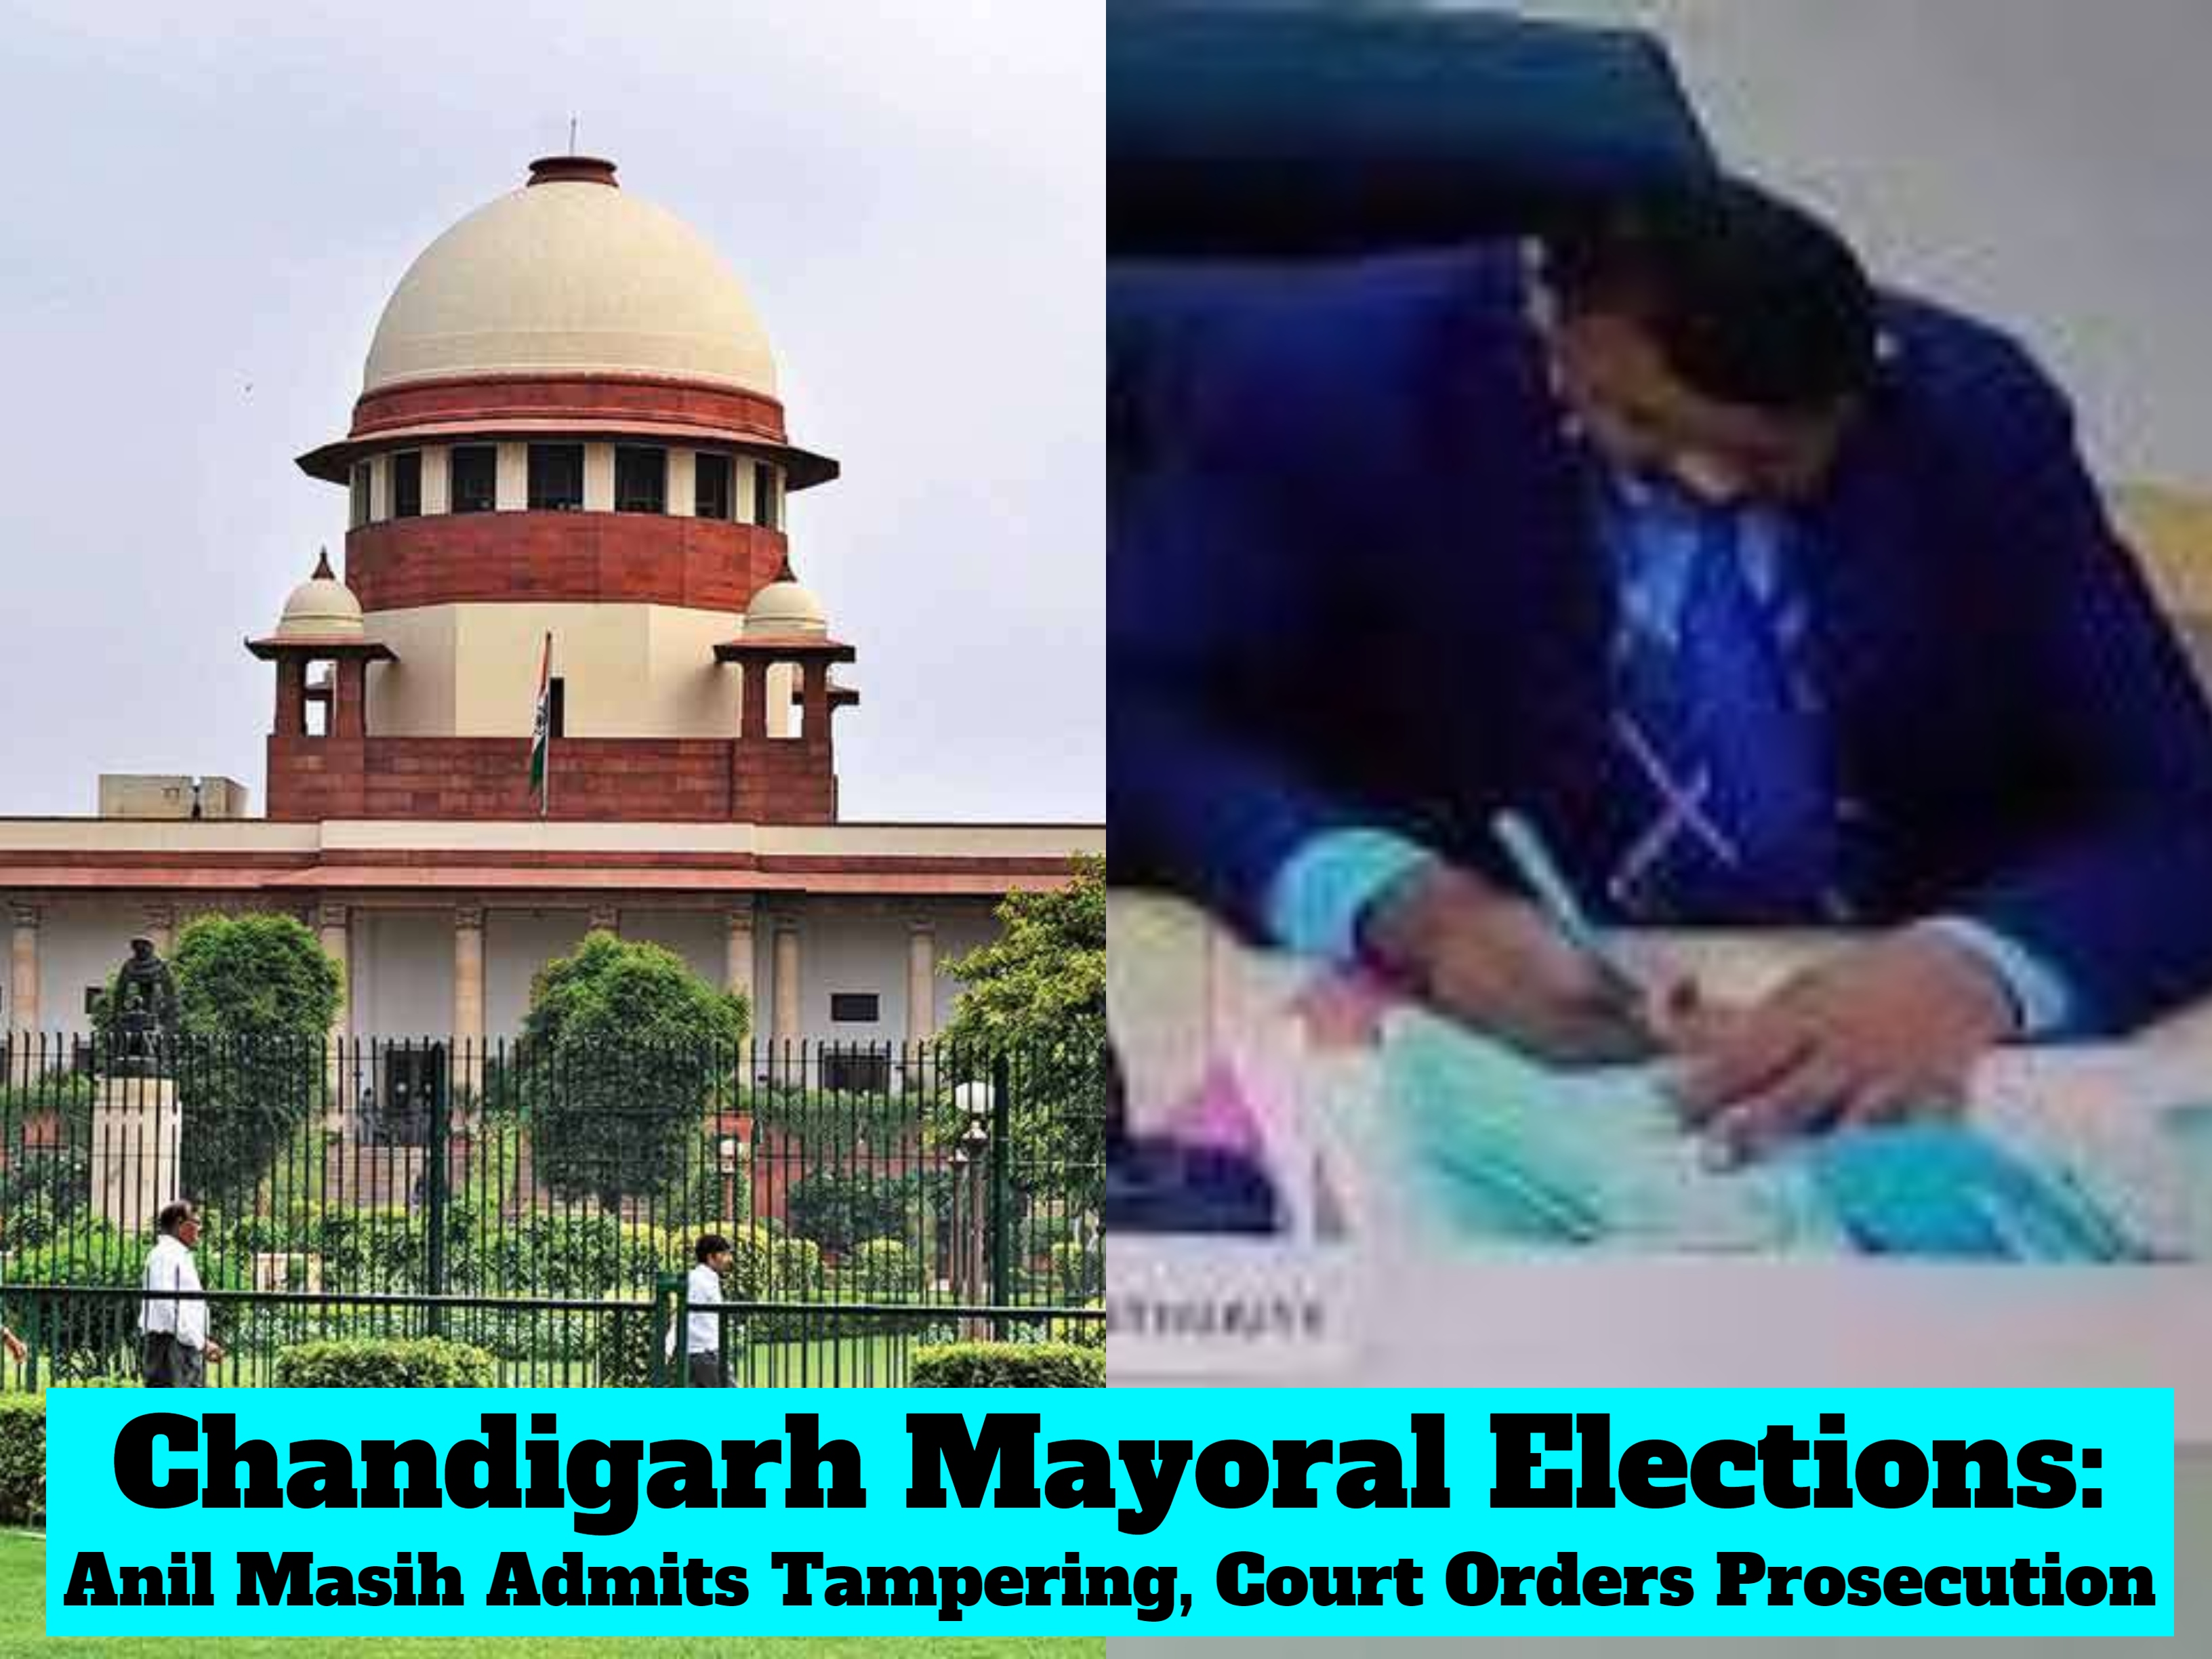 Chandigarh Mayoral Elections: Wrongdoing Admitted In Court, What Next?